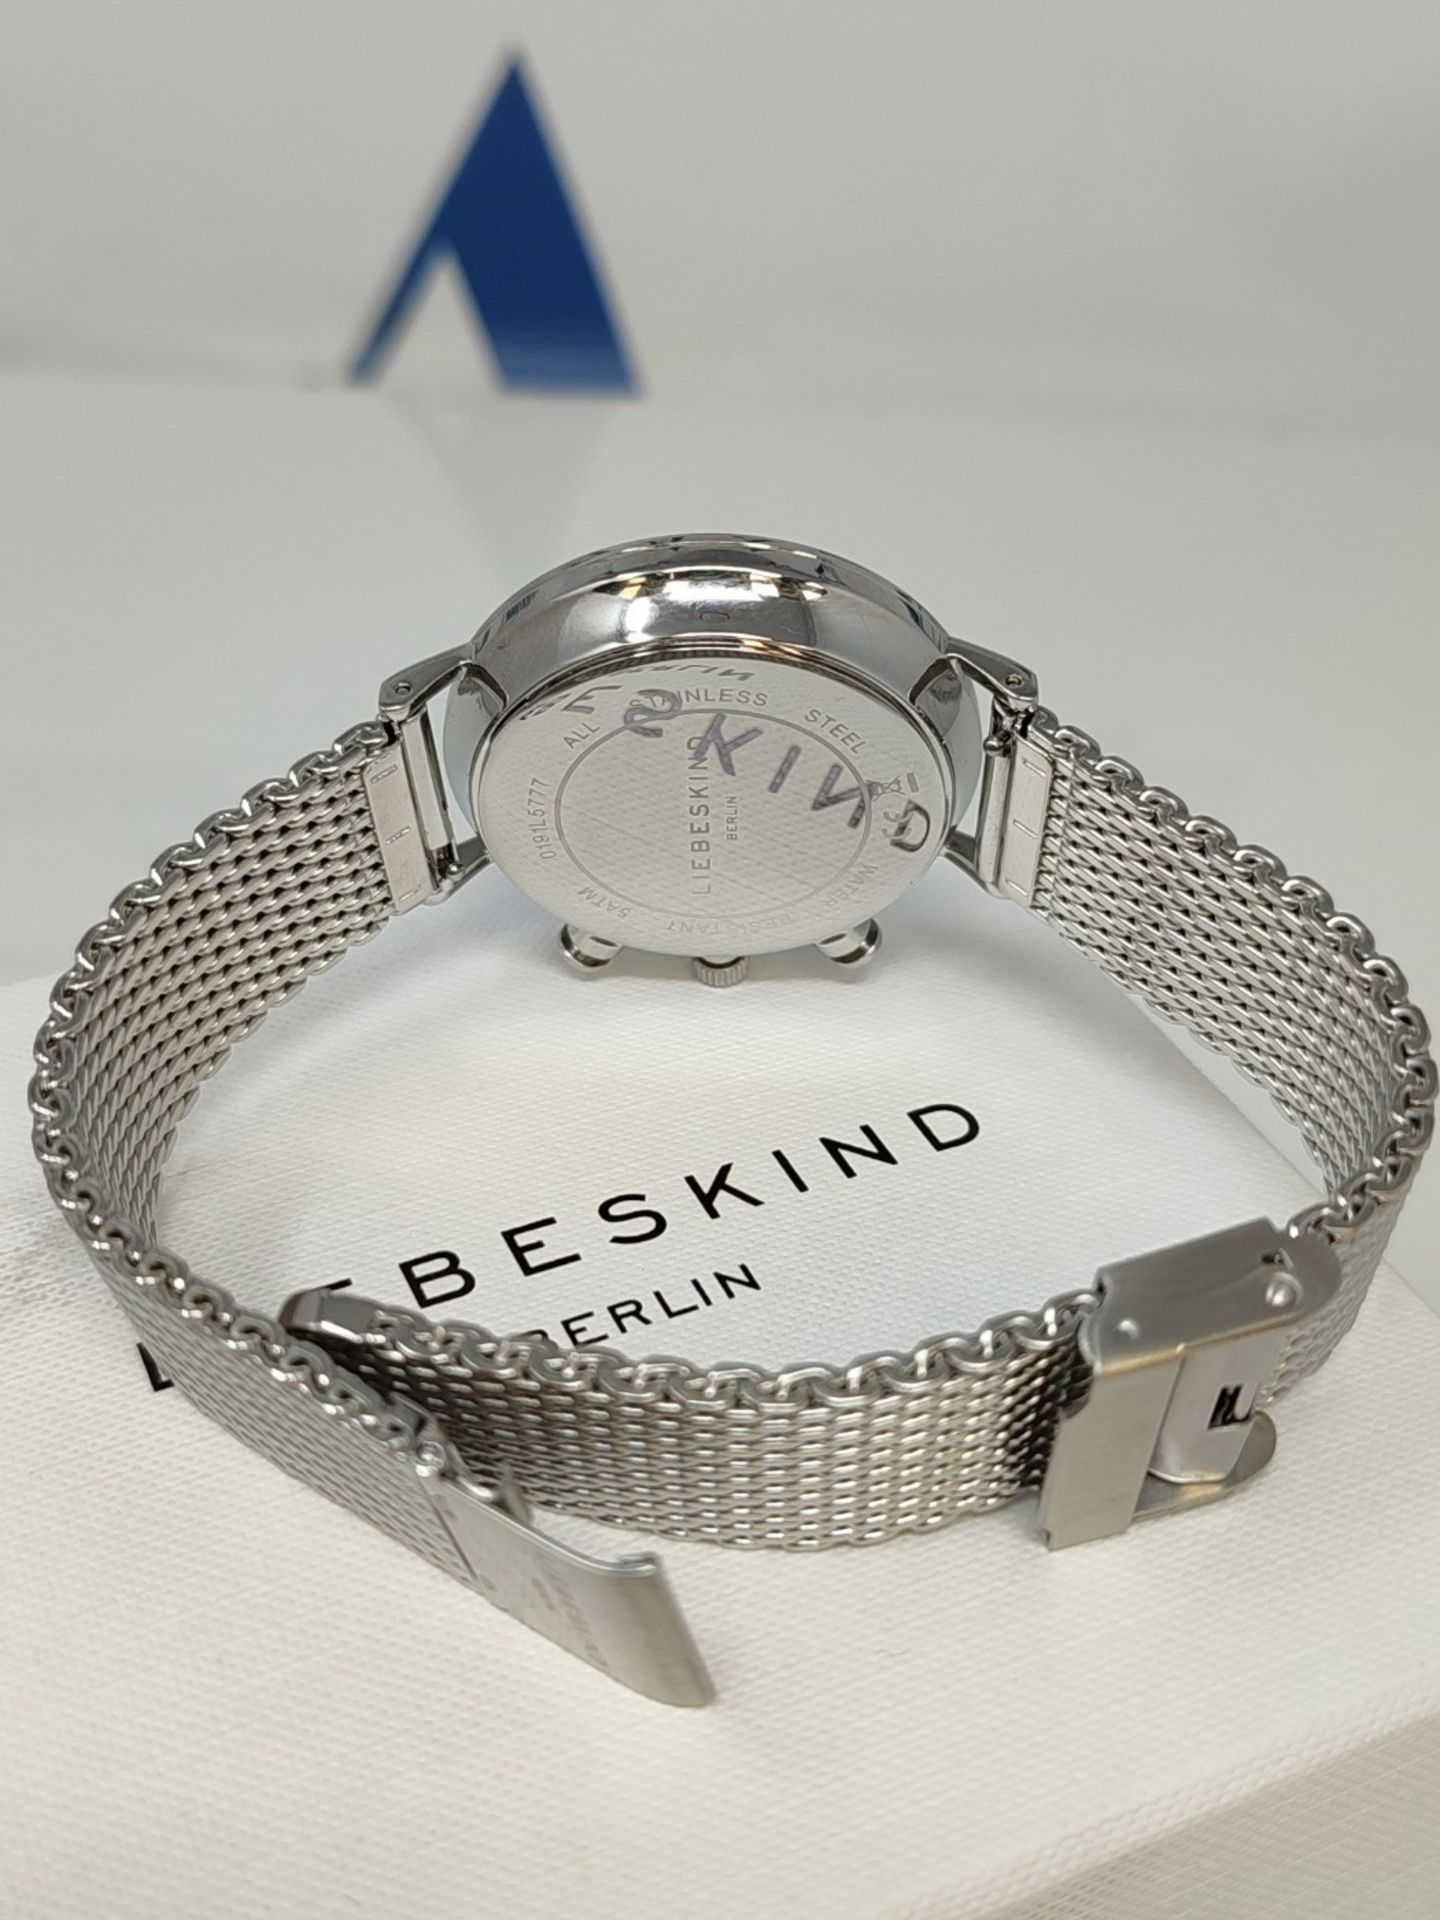 RRP £119.00 LIEBESKIND women's multi-dial quartz watch with stainless steel bracelet LT-0191-MM. - Image 3 of 3